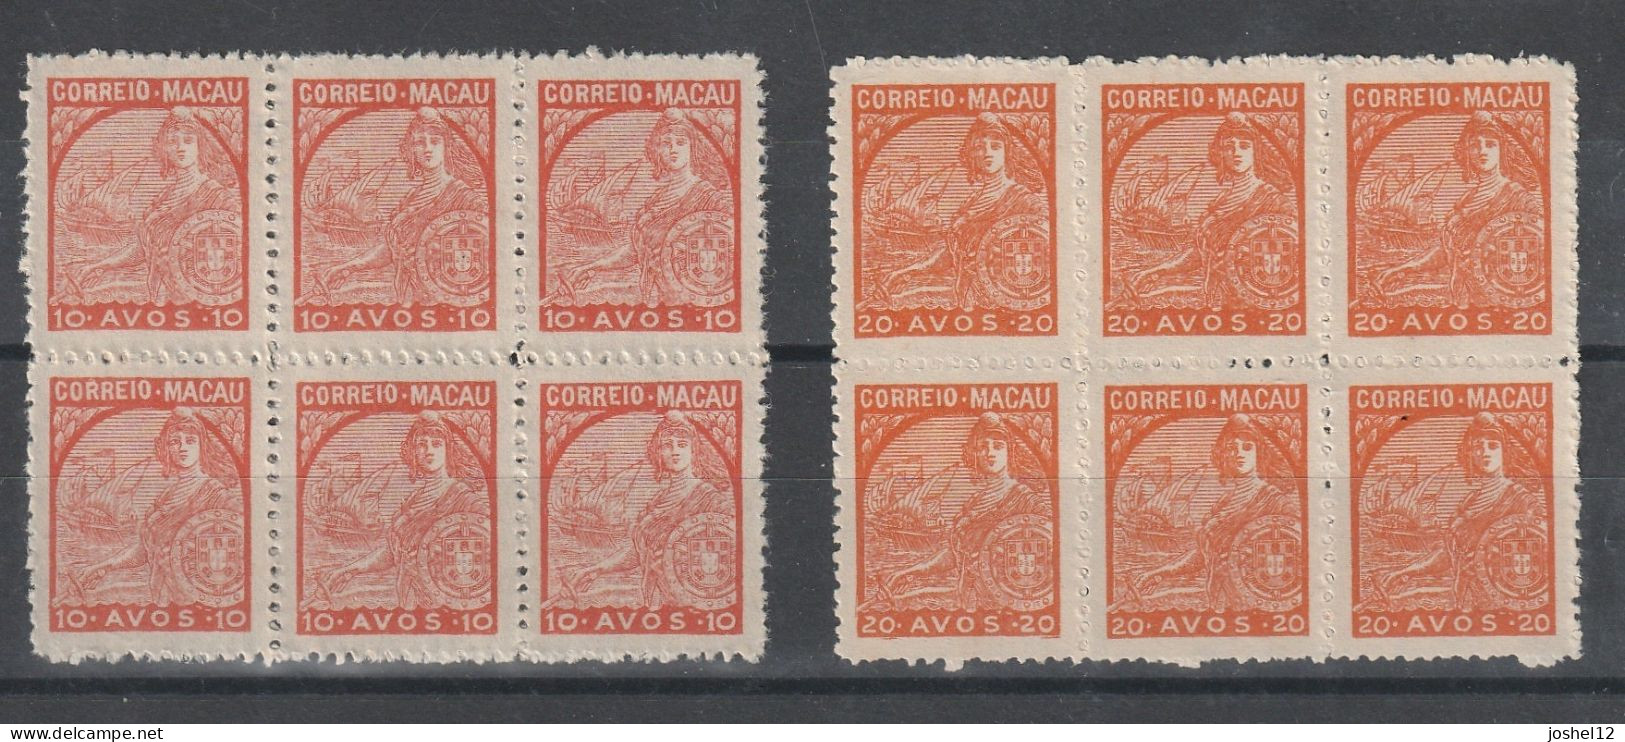 Macau Macao 1942 Padroes Set Sin Chun Print Thick Paper Block Of 6. MNH/No Gum As Issued. - Unused Stamps